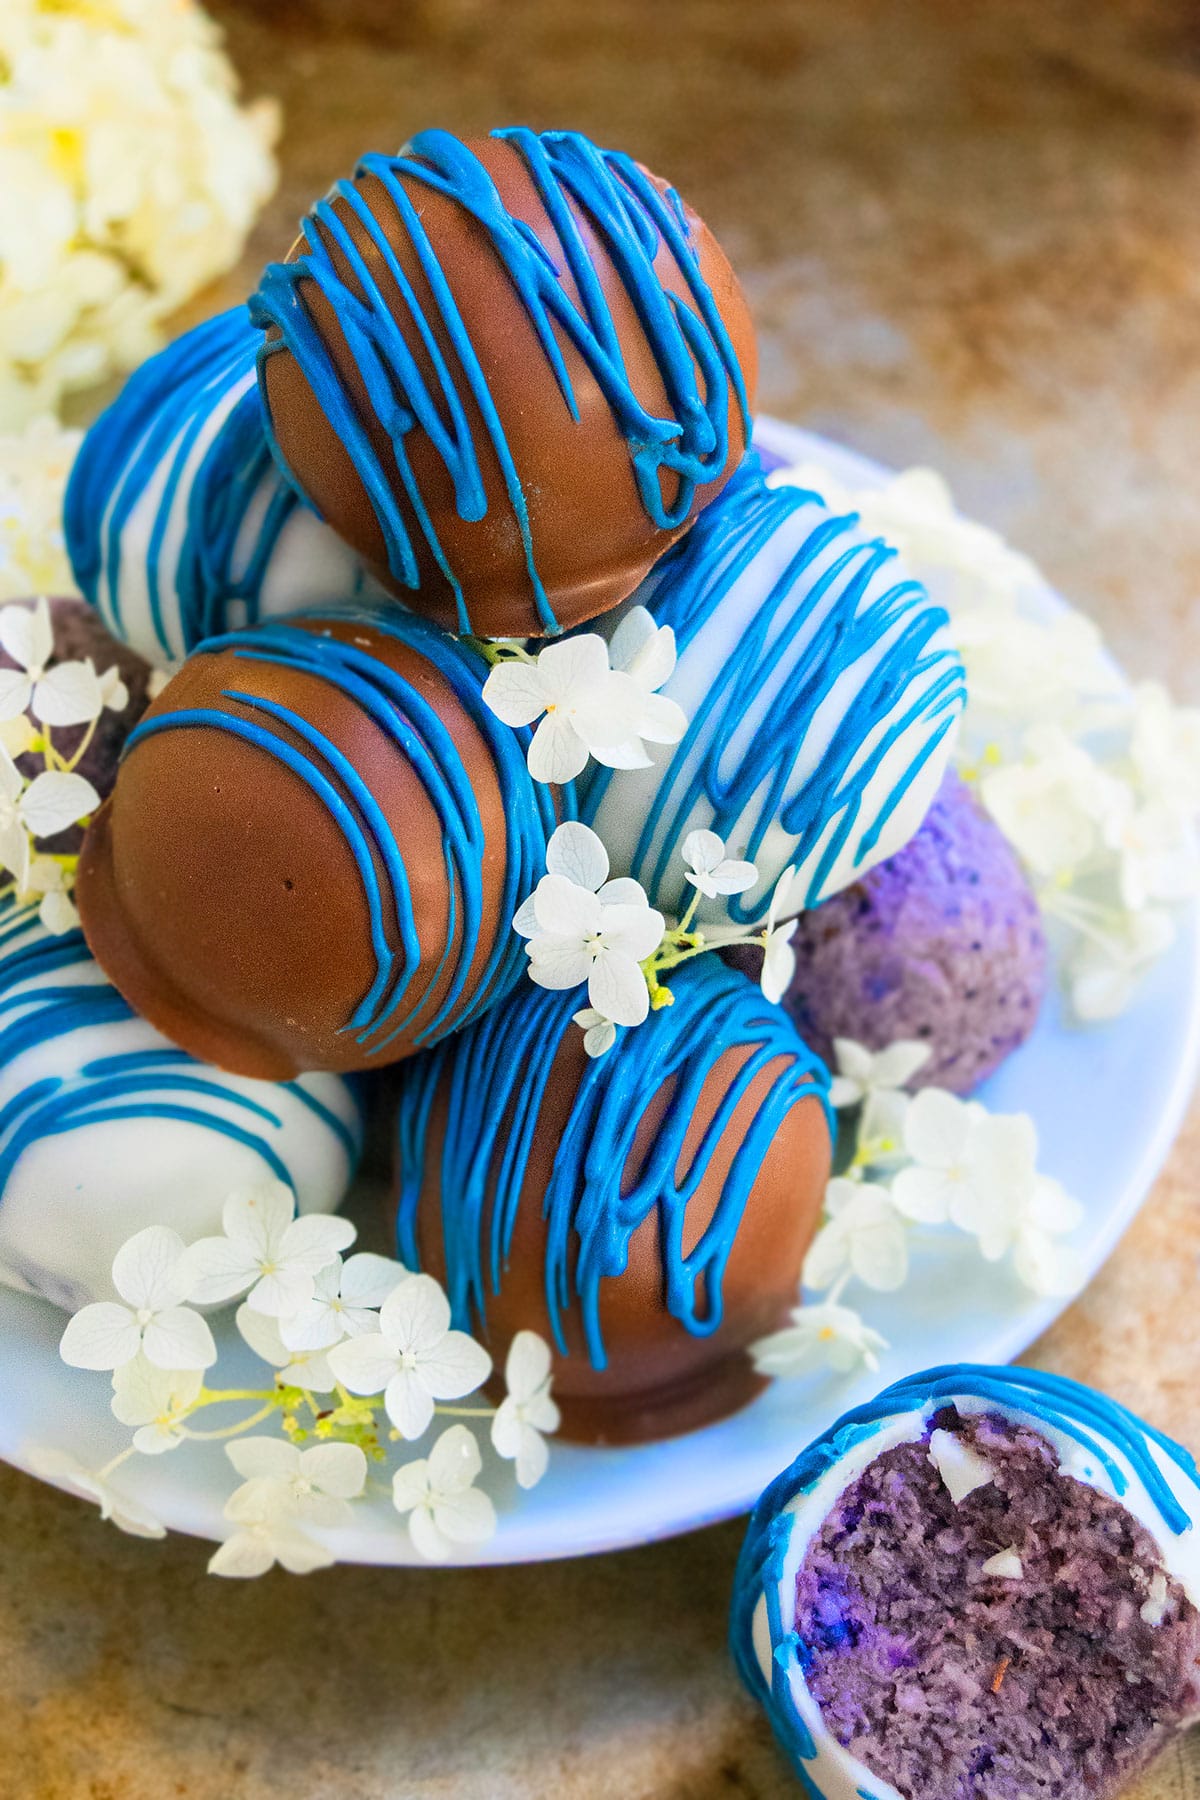 Stack of Easy Chocolate Blueberry Truffles on White Dish. 